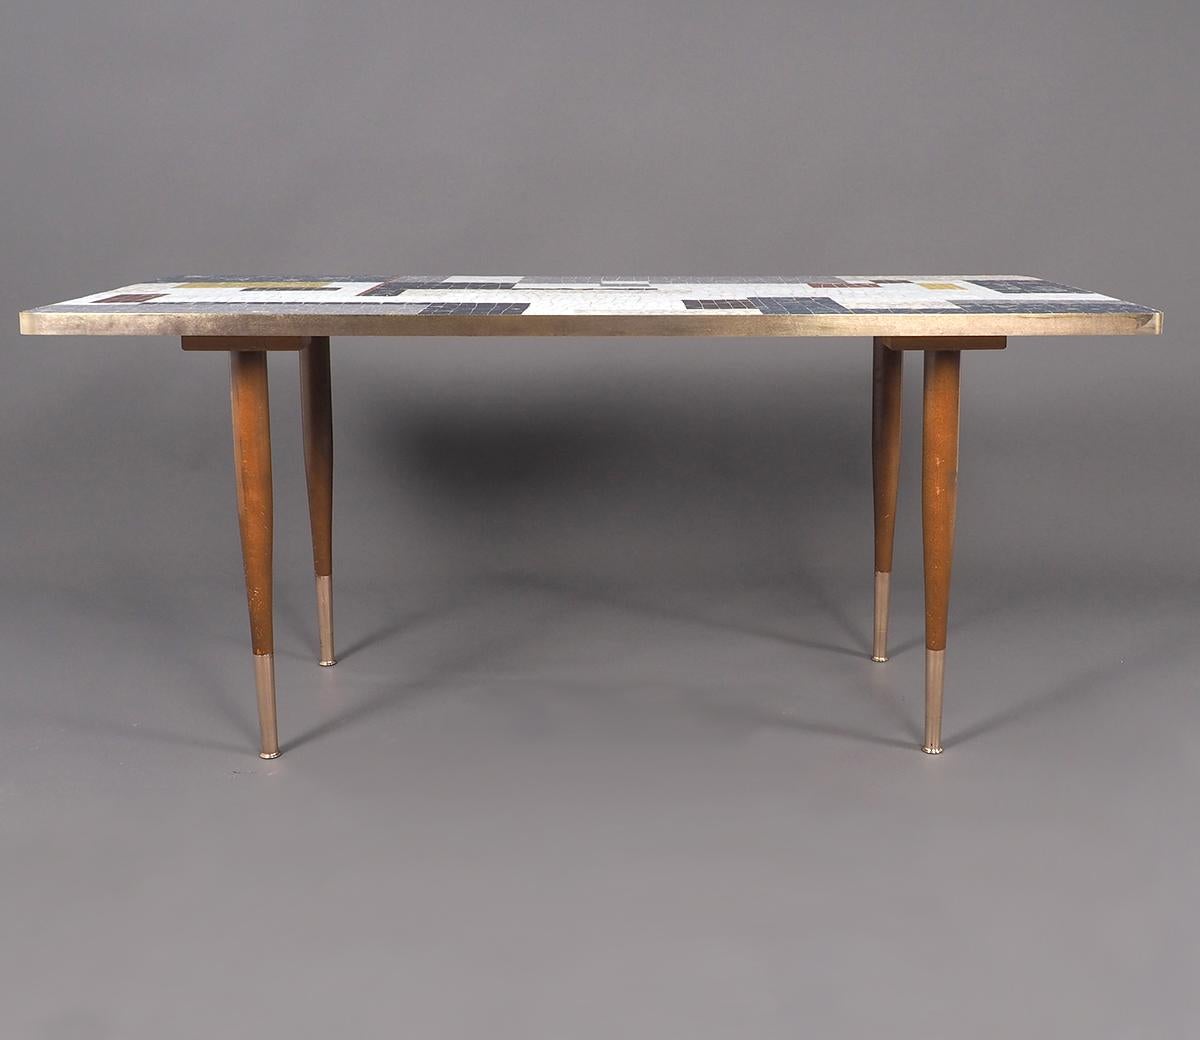 Brass Mid-Century Modern Mosaic Coffee Table from Ilse Möbel, 1950s For Sale